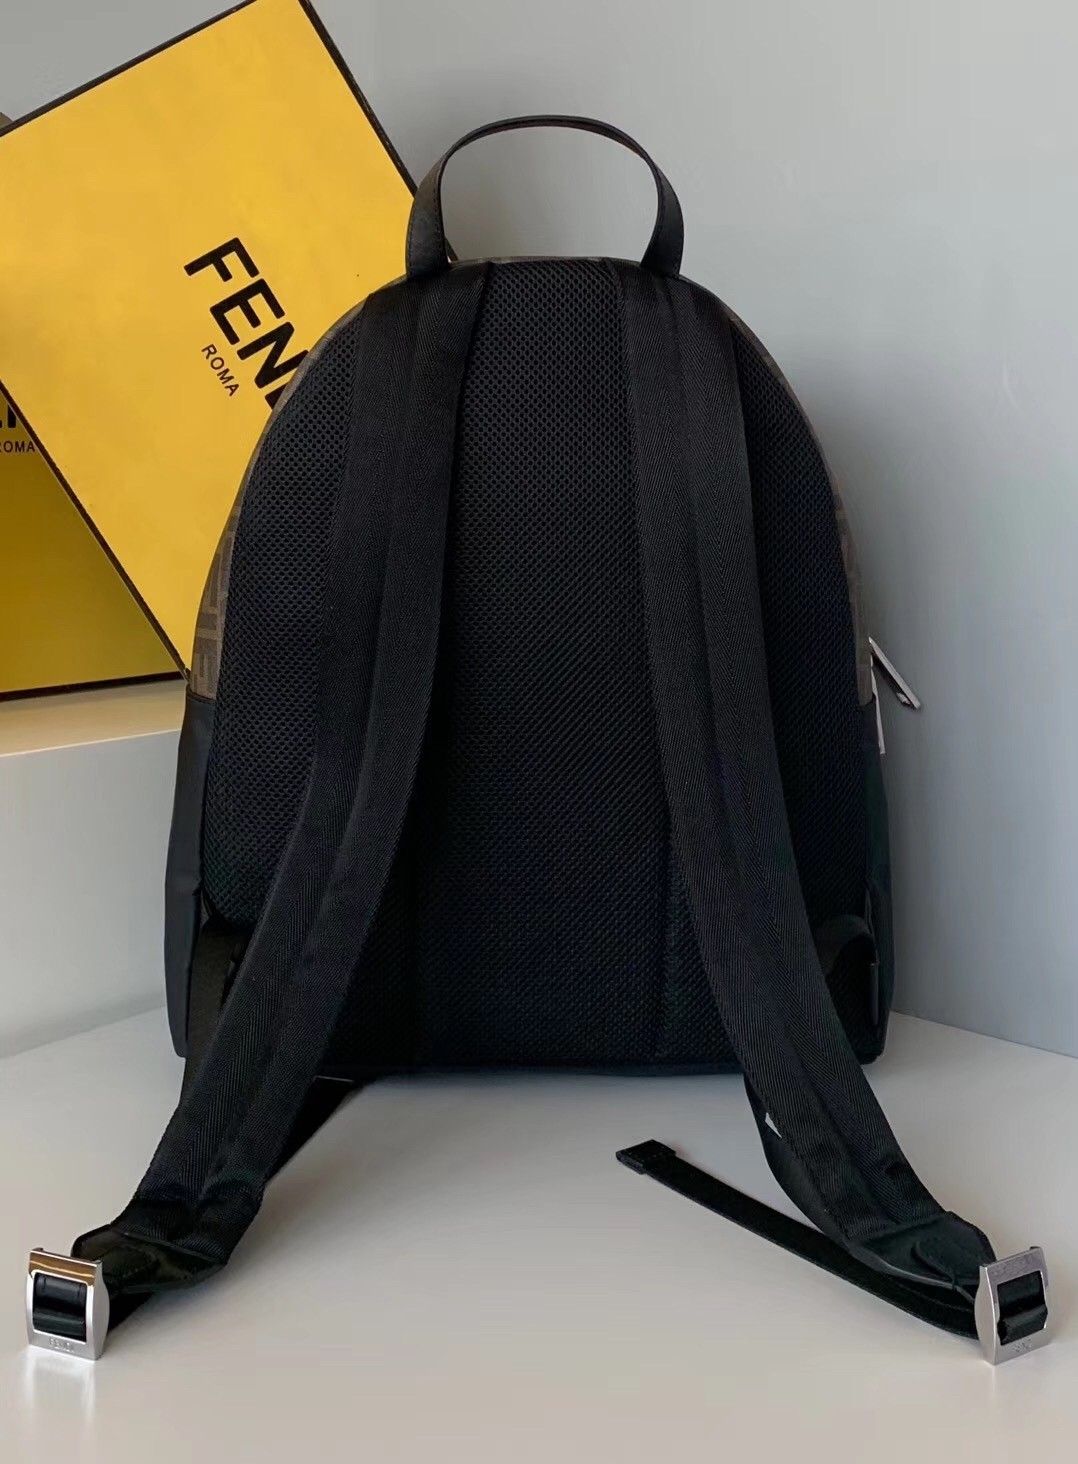 Fendi Large Backpack In FF Fabric With Nylon And Leather 525